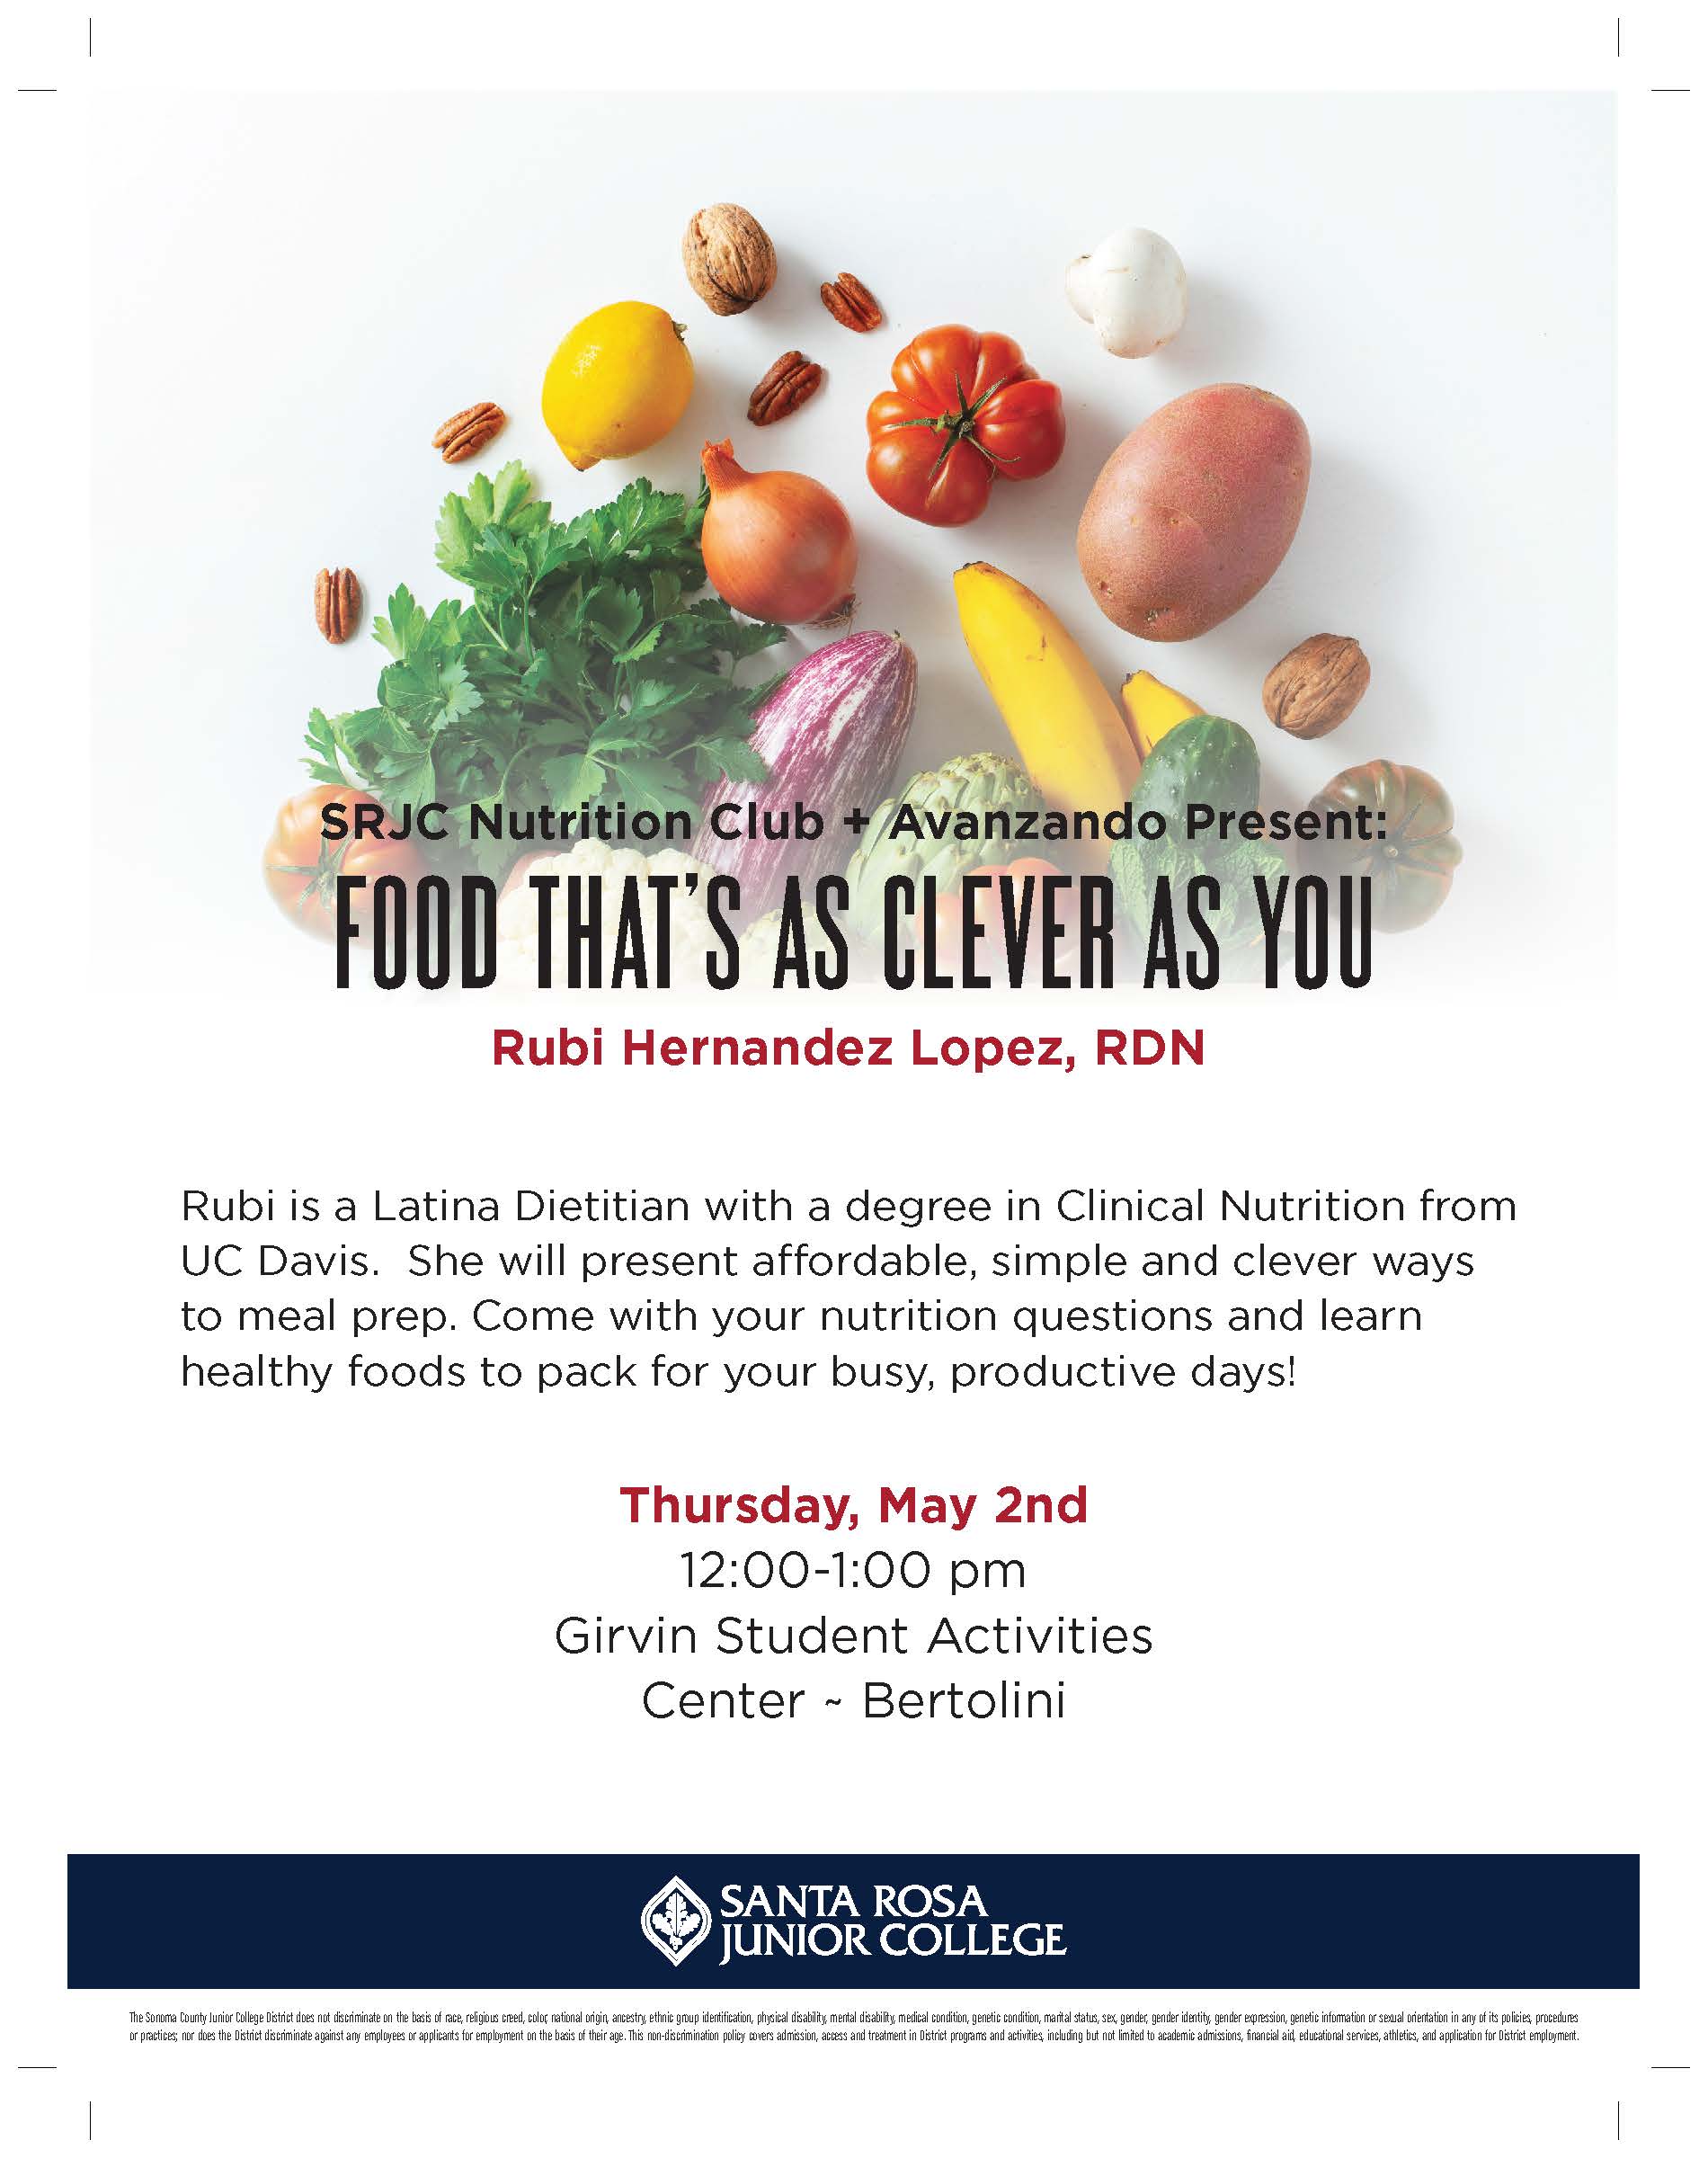 SRJC Nutrition Club + Avanzando Present: FOOD THAT’S AS CLEVER AS YOU Rubi Hernandez Lopez, RDN Rubi is a Latina Dietitian with a degree in Clinical Nutrition from UC Davis. She will present affordable, simple and clever ways to meal prep. Come with your nutrition questions and learn healthy foods to pack for your busy, productive days! Thursday, May 2nd 12:00-1:00 pm Girvin Student Activities Center ~ Bertolini